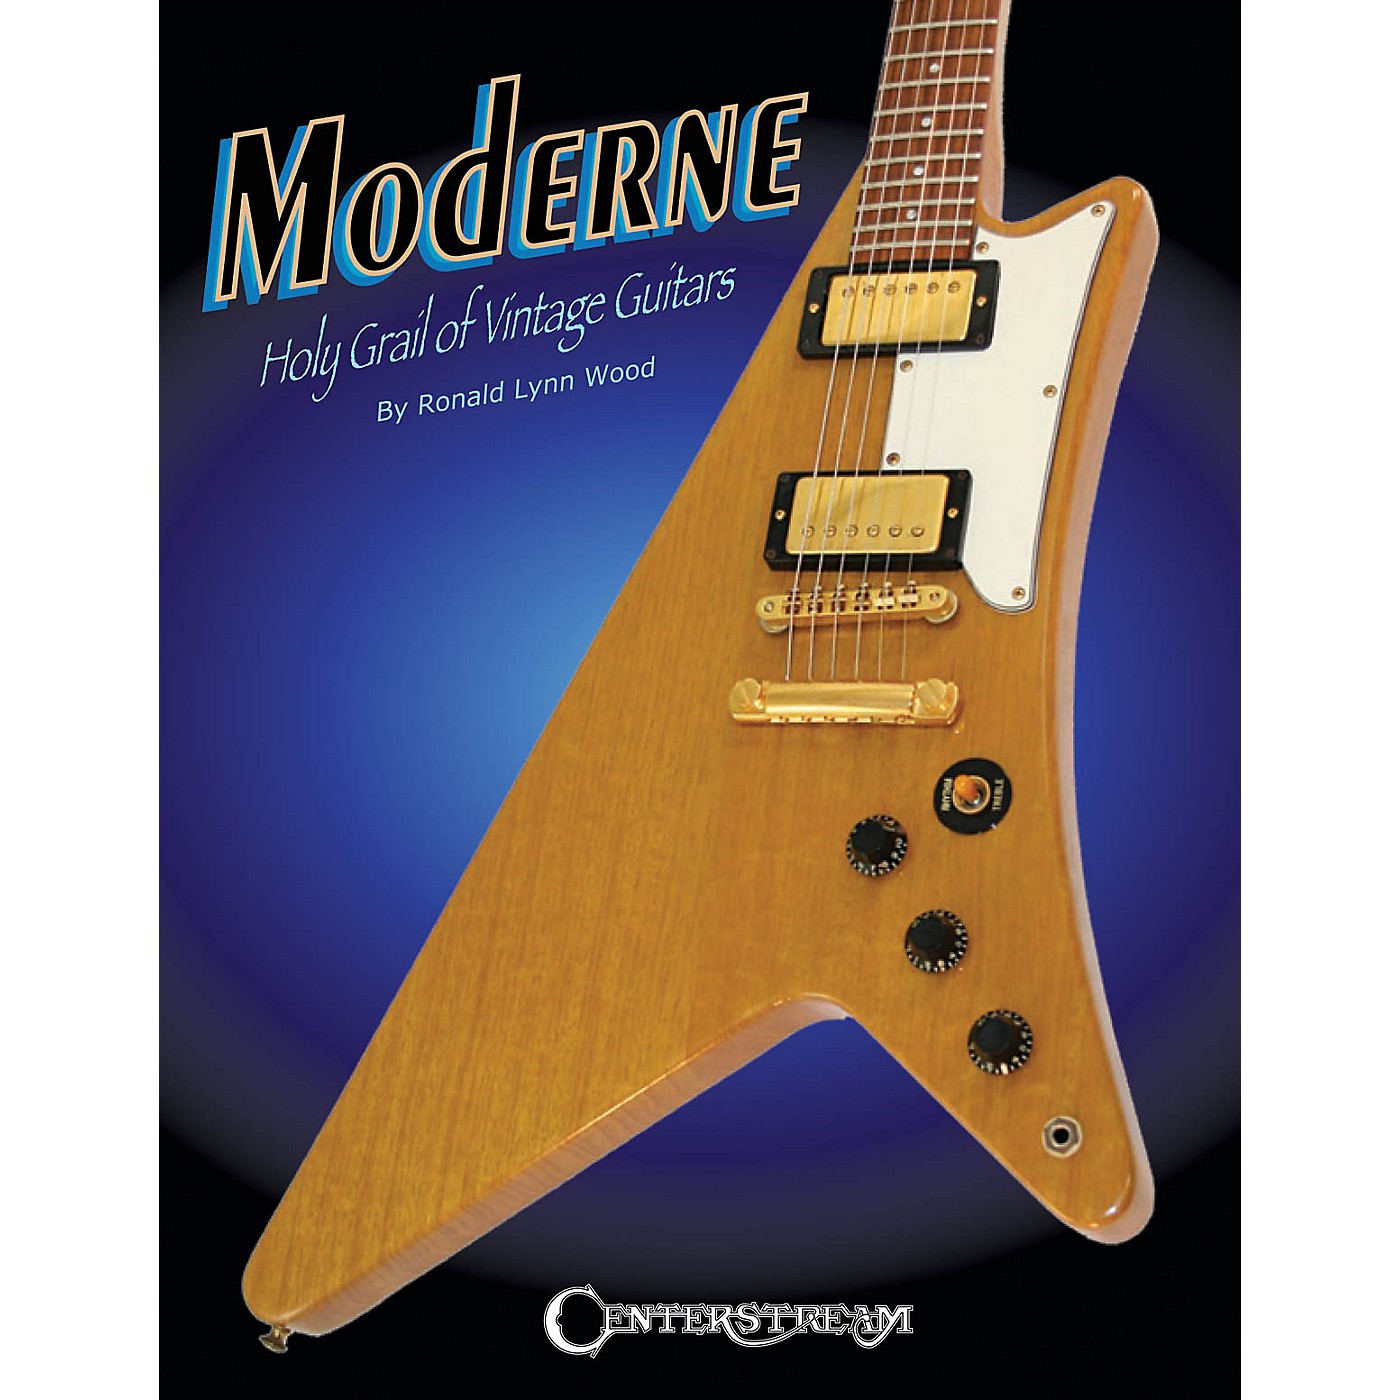 Centerstream Publishing Moderne (Holy Grail of Vintage Guitars) Guitar Series Softcover Written by Ronald Lynn Wood thumbnail